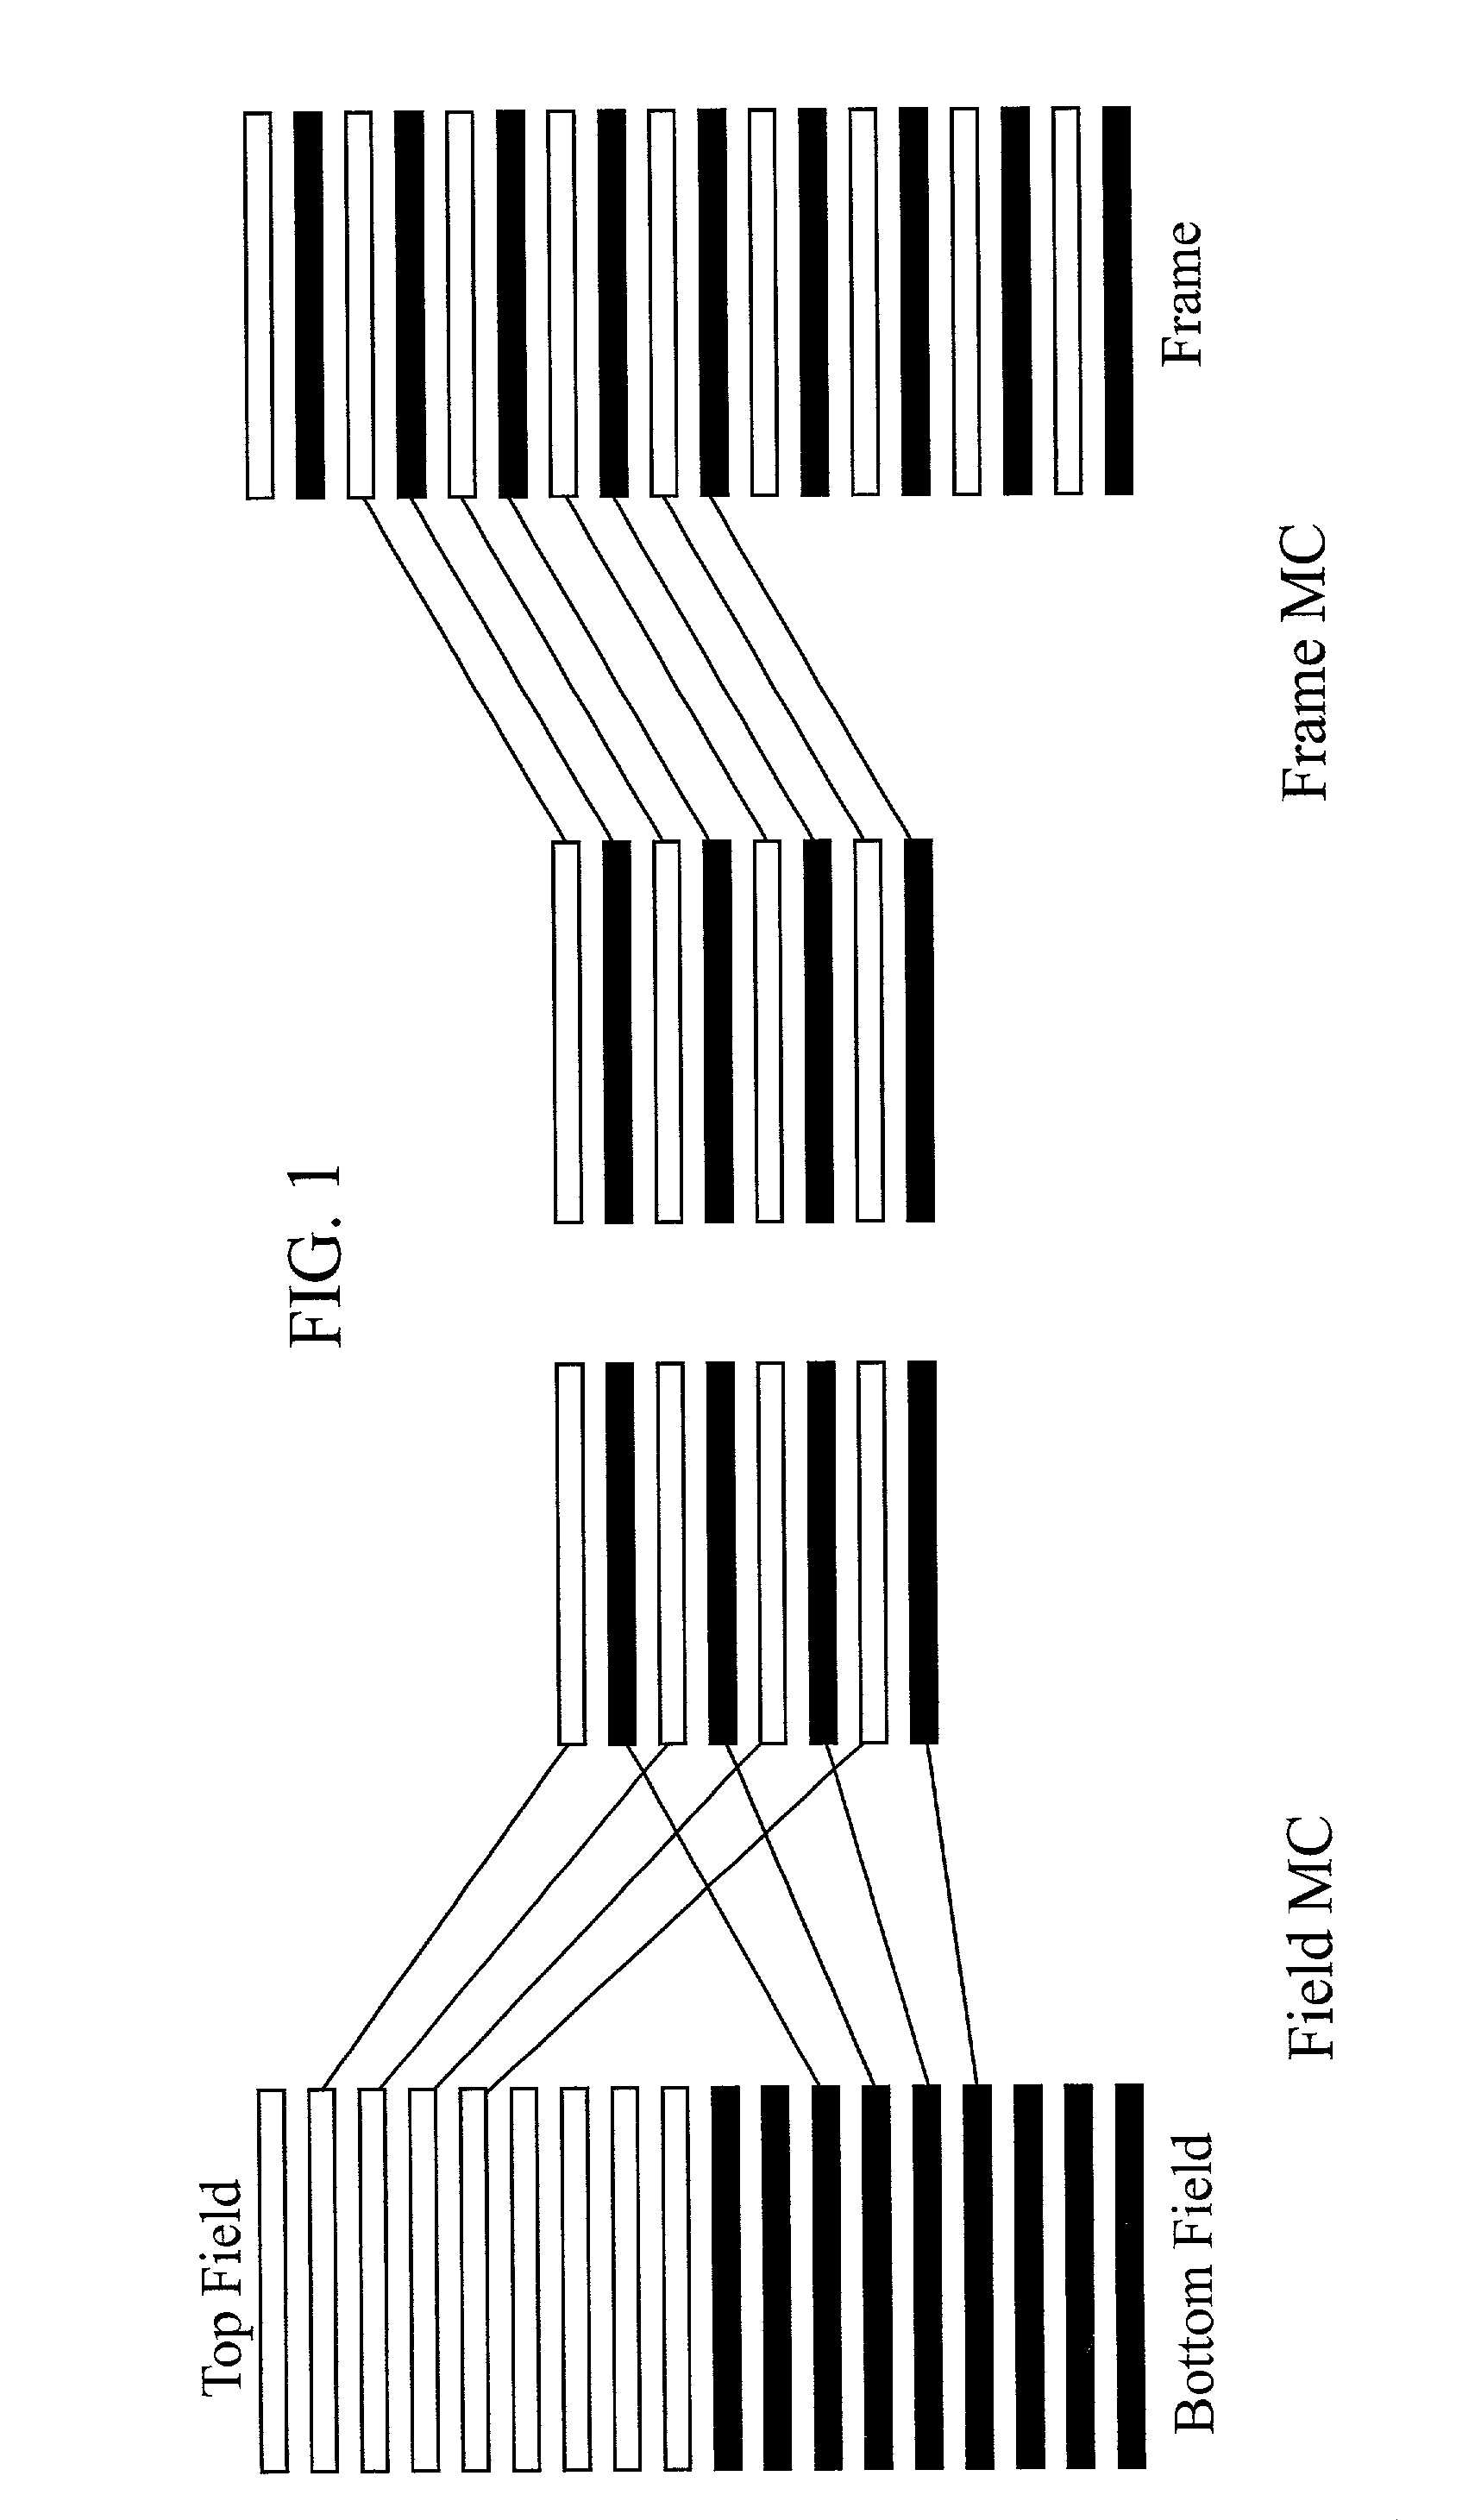 Decoding system and method for proper interpolation for motion compensation